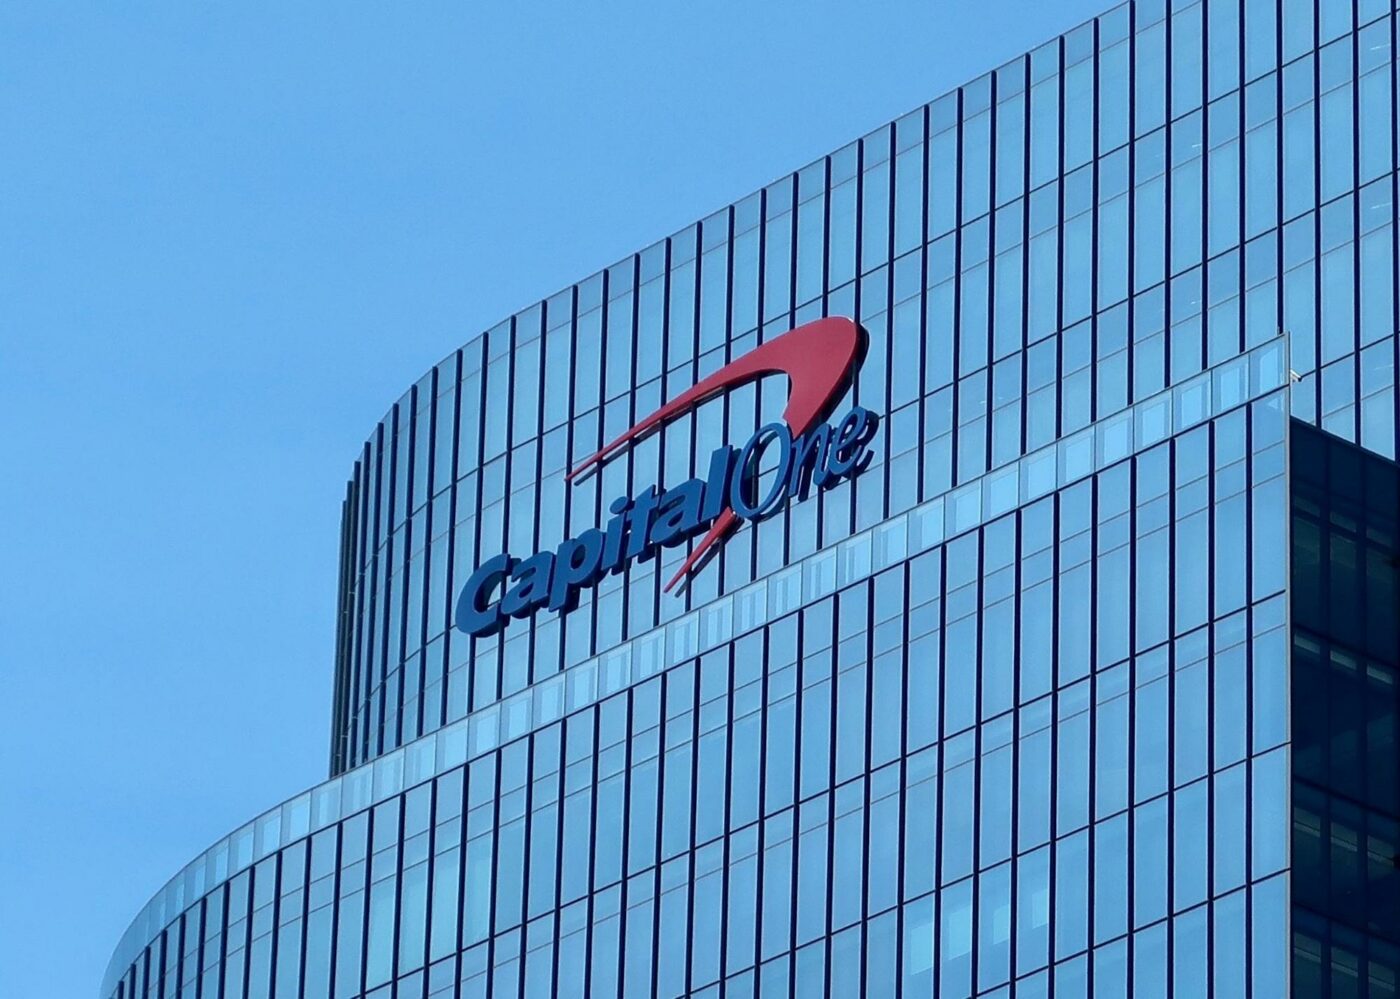 Capital One building